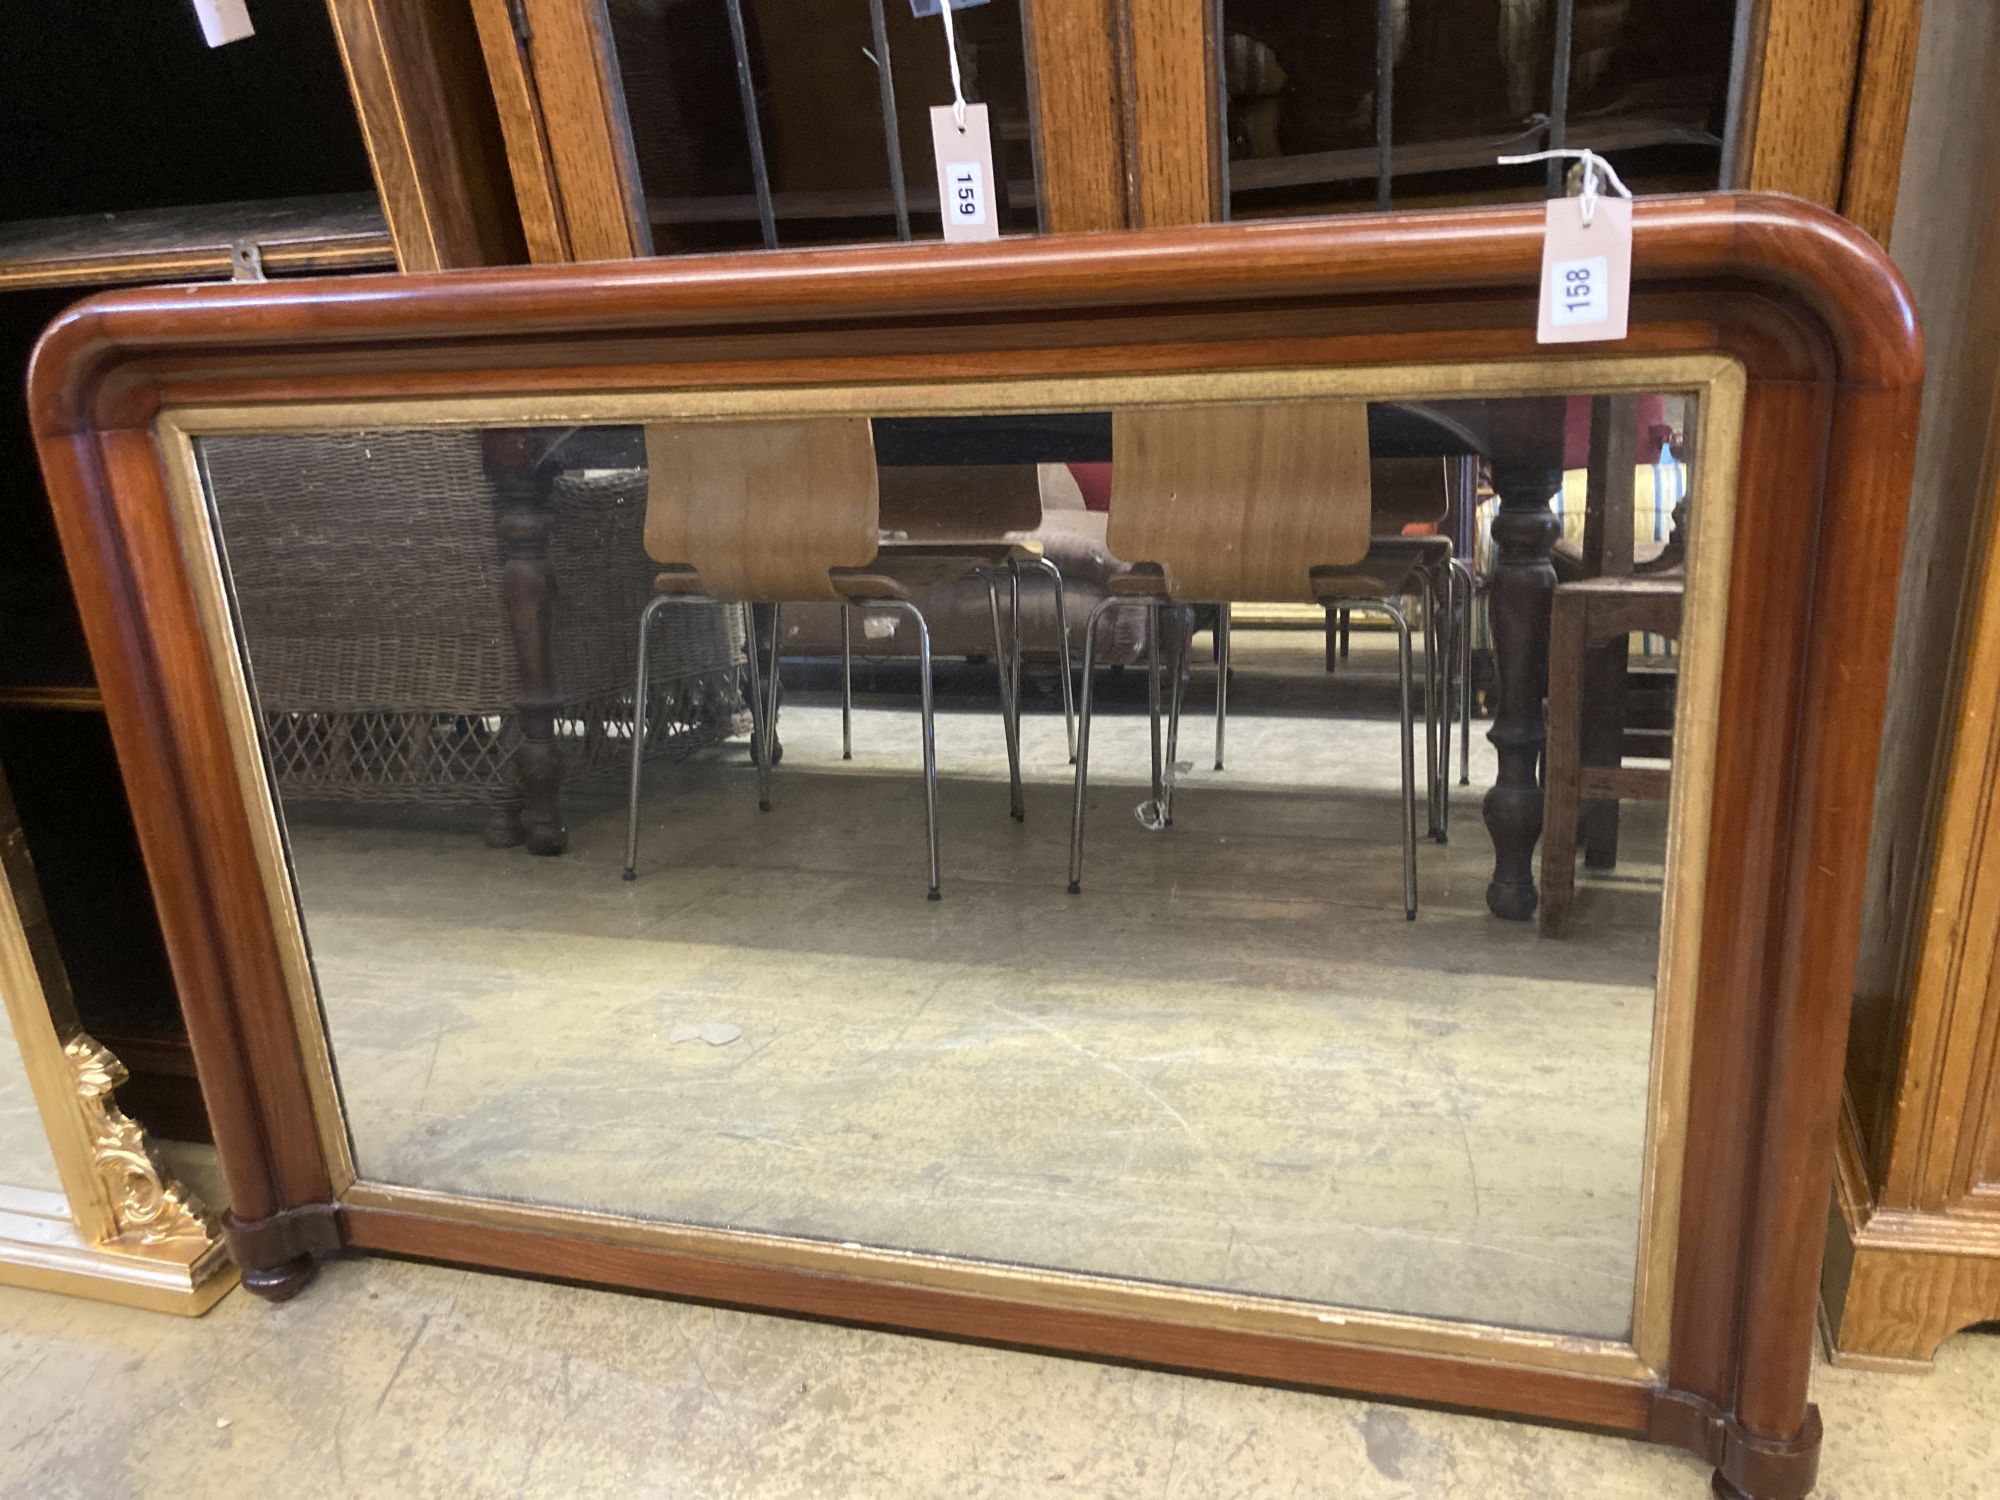 A Victorian mahogany overmantel mirror, width 102cm, height 71cm, together with a reproduction gilt framed overmantel mirror